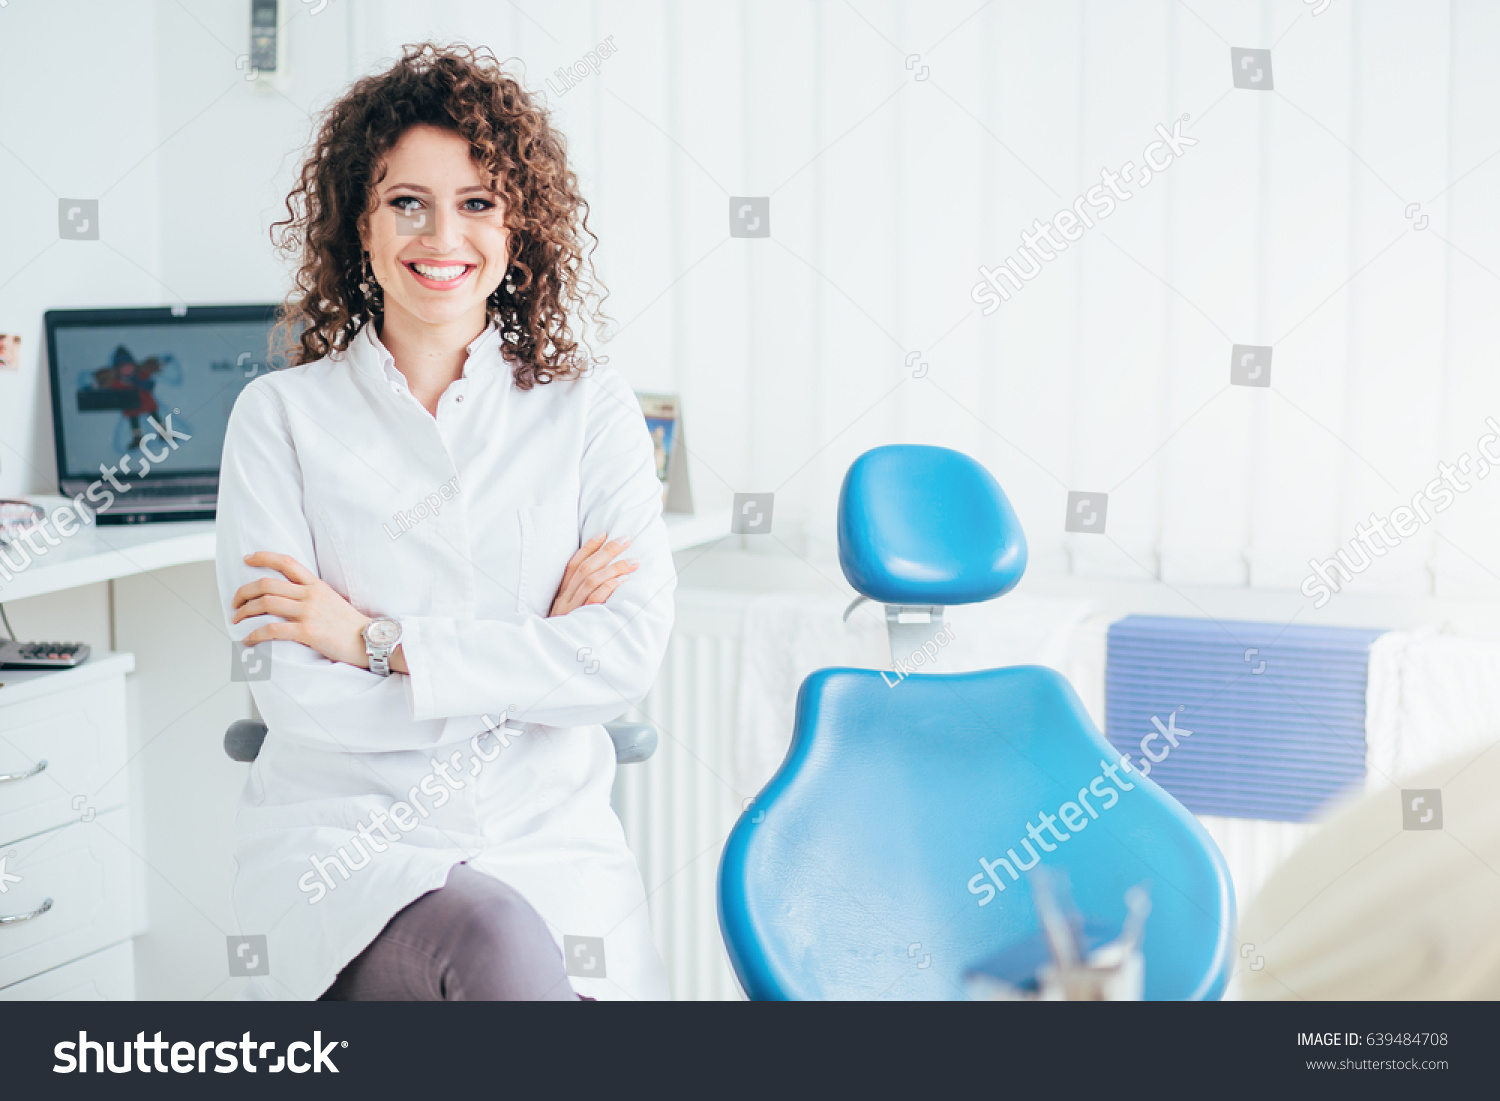 Portrait of female dentist. She standing at her office and she has beautiful smile. #639484708